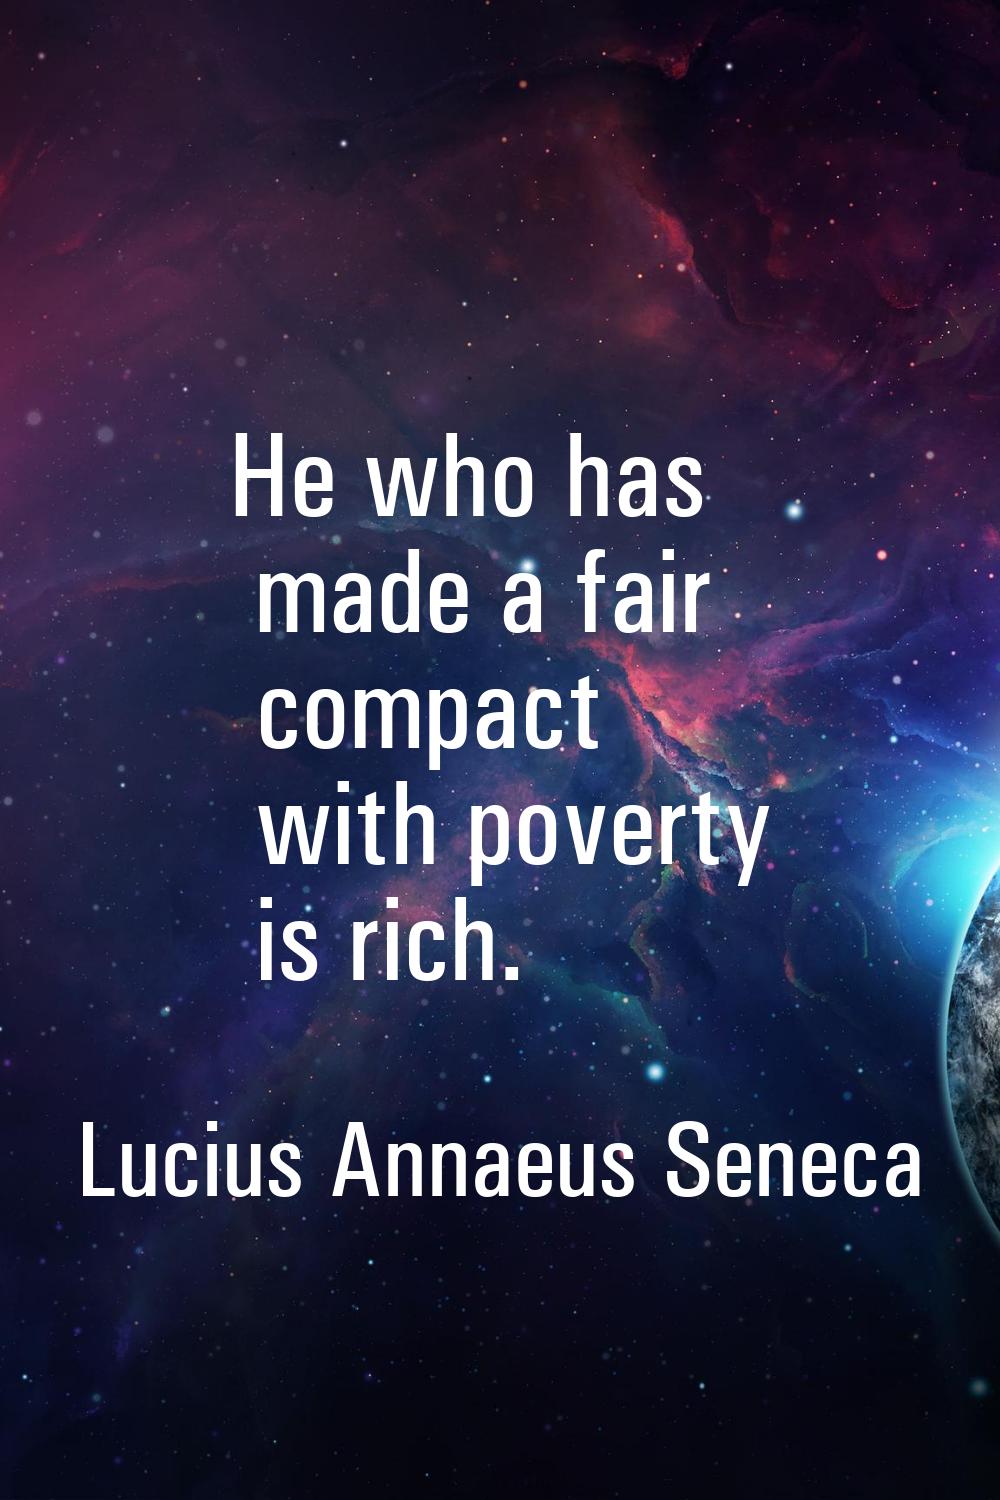 He who has made a fair compact with poverty is rich.